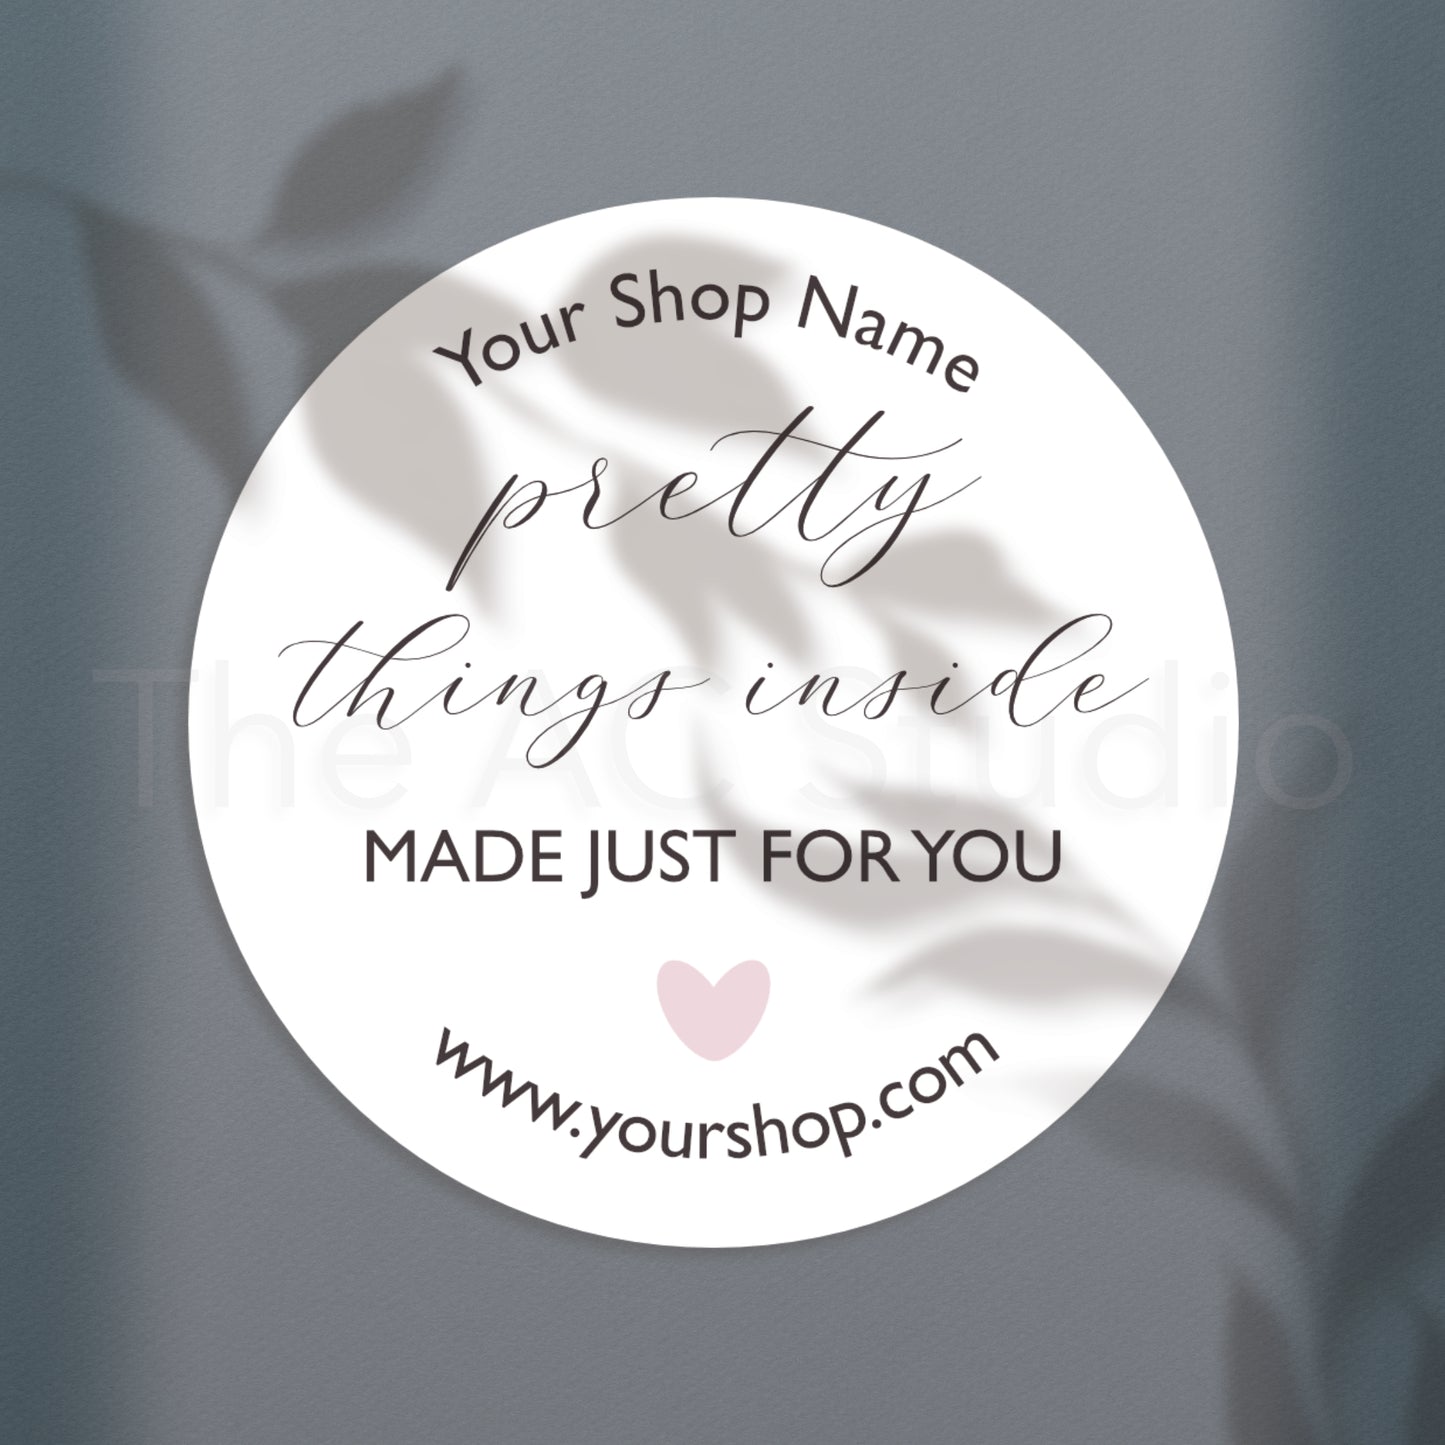 Personalized Circle Labels for Your Small Business (Style 7)